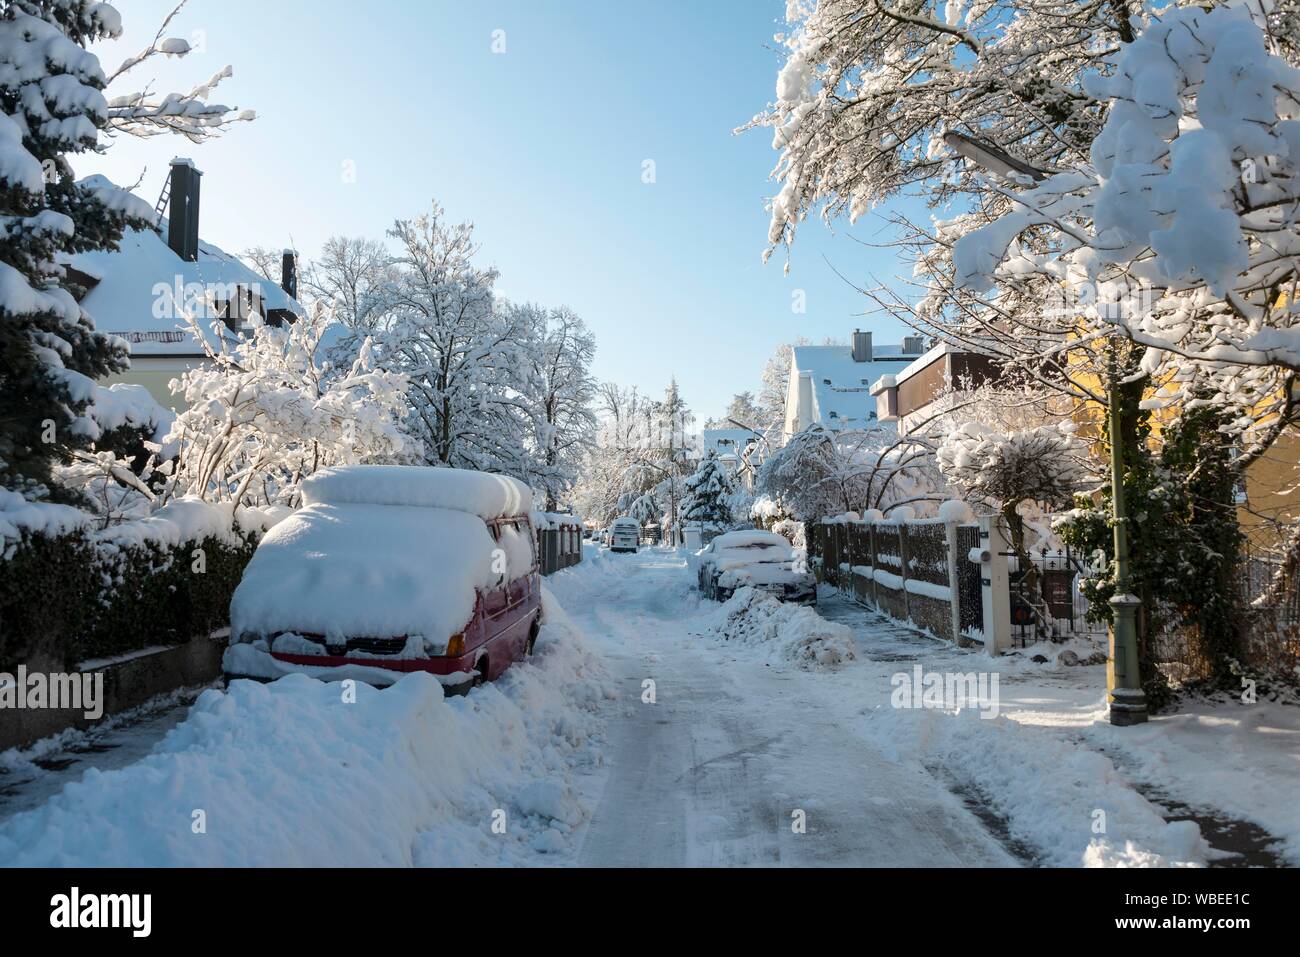 Snow in narrow streets with snowed-in cars in the residential area, Munich, Upper Bavaria, Bavaria, Germany Stock Photo